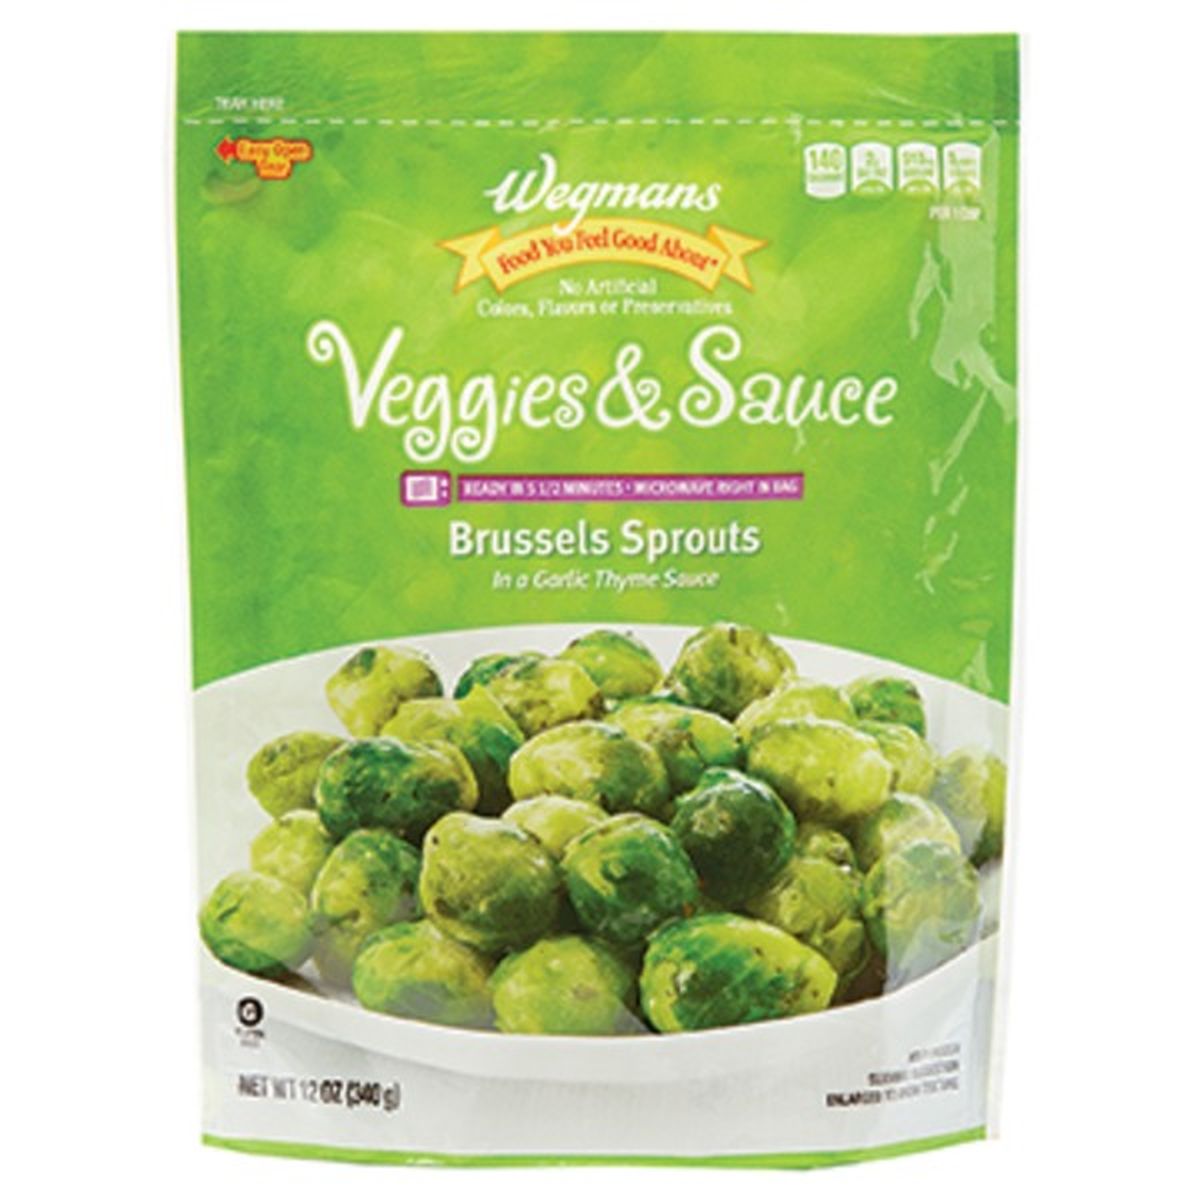 Calories in Wegmans Microwaveable Veggies & Sauce, Brussels Sprouts in a Garlic Thyme Sauce